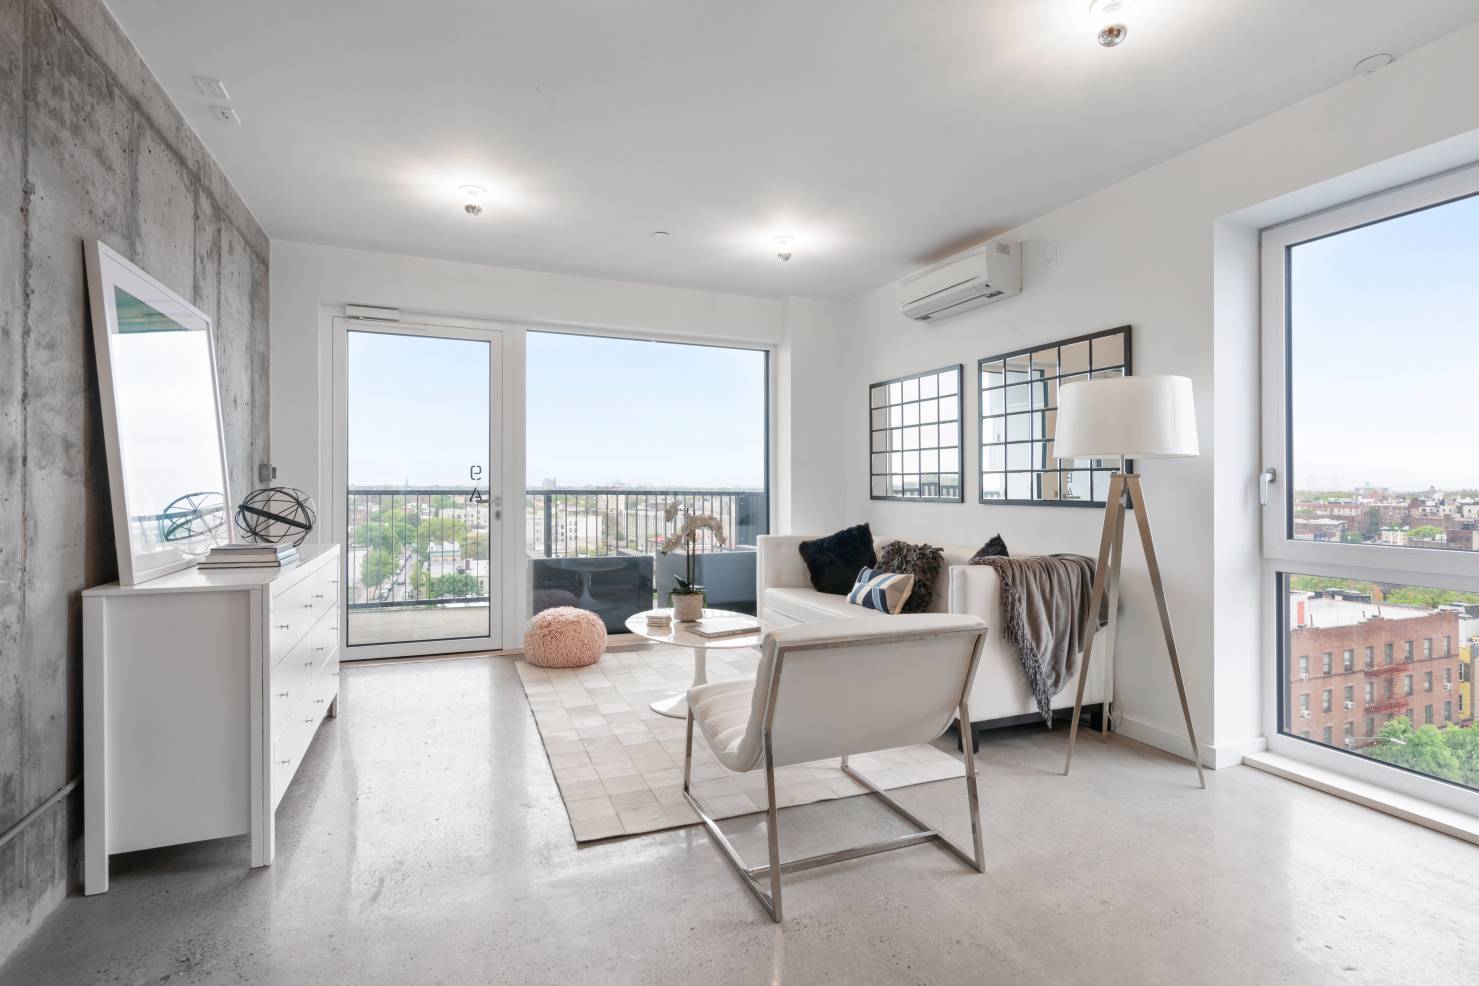 Located at 2417 Albemarle Road, Hello Albemarle by seasoned developer, Hello Living, is a rental collection of stunning floor through apartments that open onto large south facing balconies.